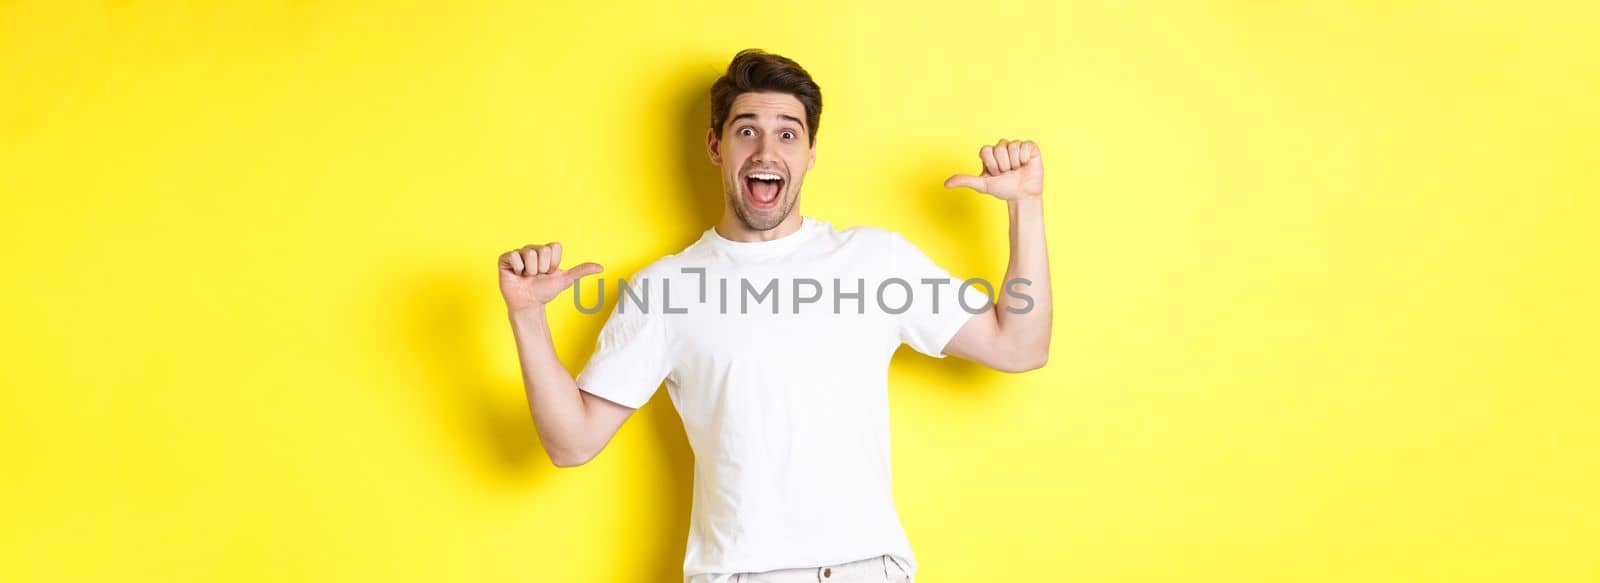 Excited man looking happy, pointing at himself with amazement, standing over yellow background.